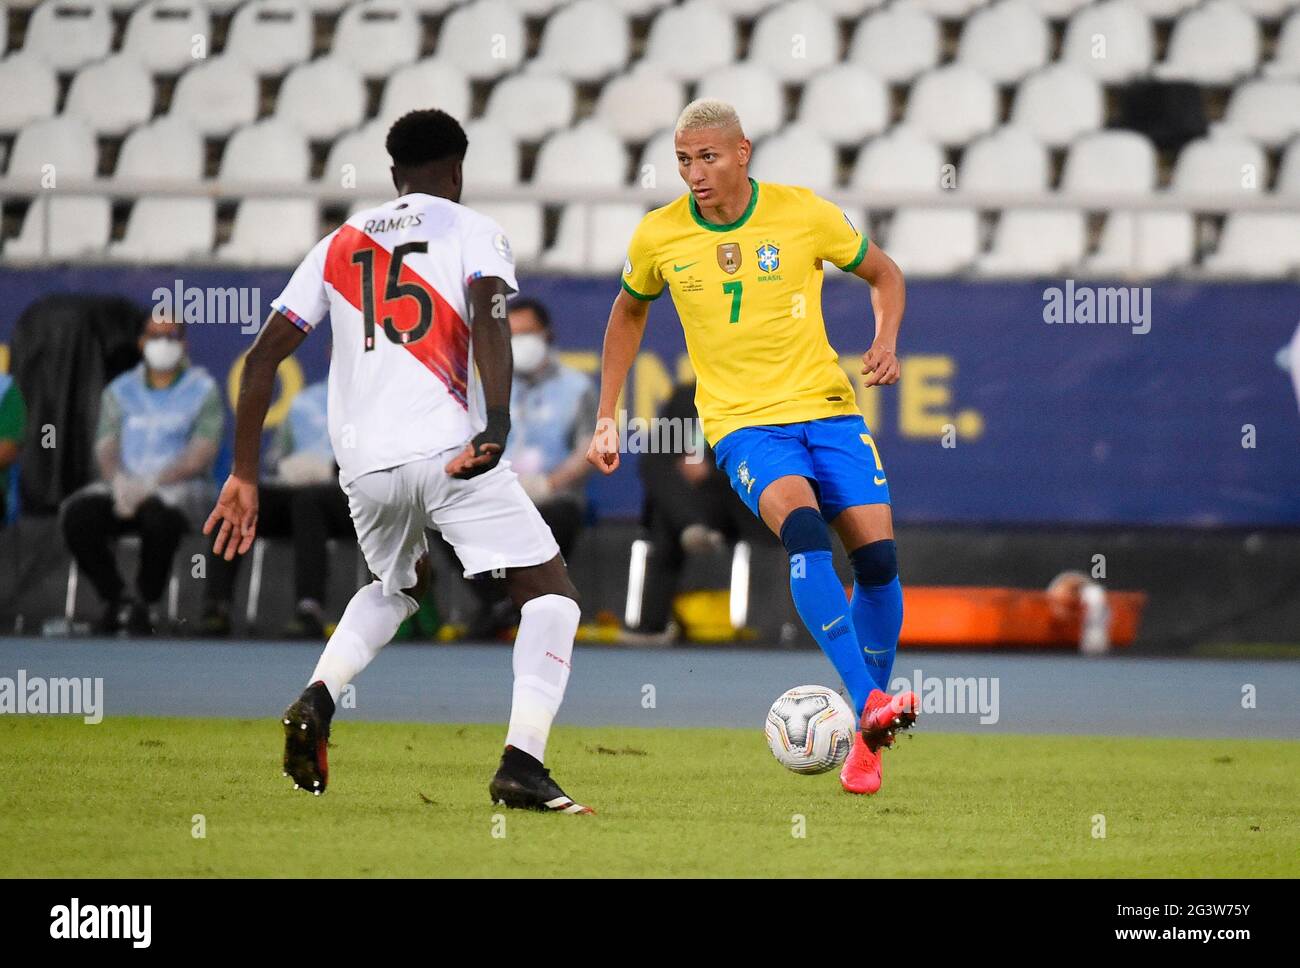 Rio de Janeiro, Brazil. 17th June, 2021: Peru's Andre Carrillo, left, and Brazil's Richarlison battle for the ball during a Copa America soccer match at Nilton Santos stadium in Rio de Janeiro, Brazil 17 Jun 2021 Credit: Andre Paes/Alamy Live News Stock Photo